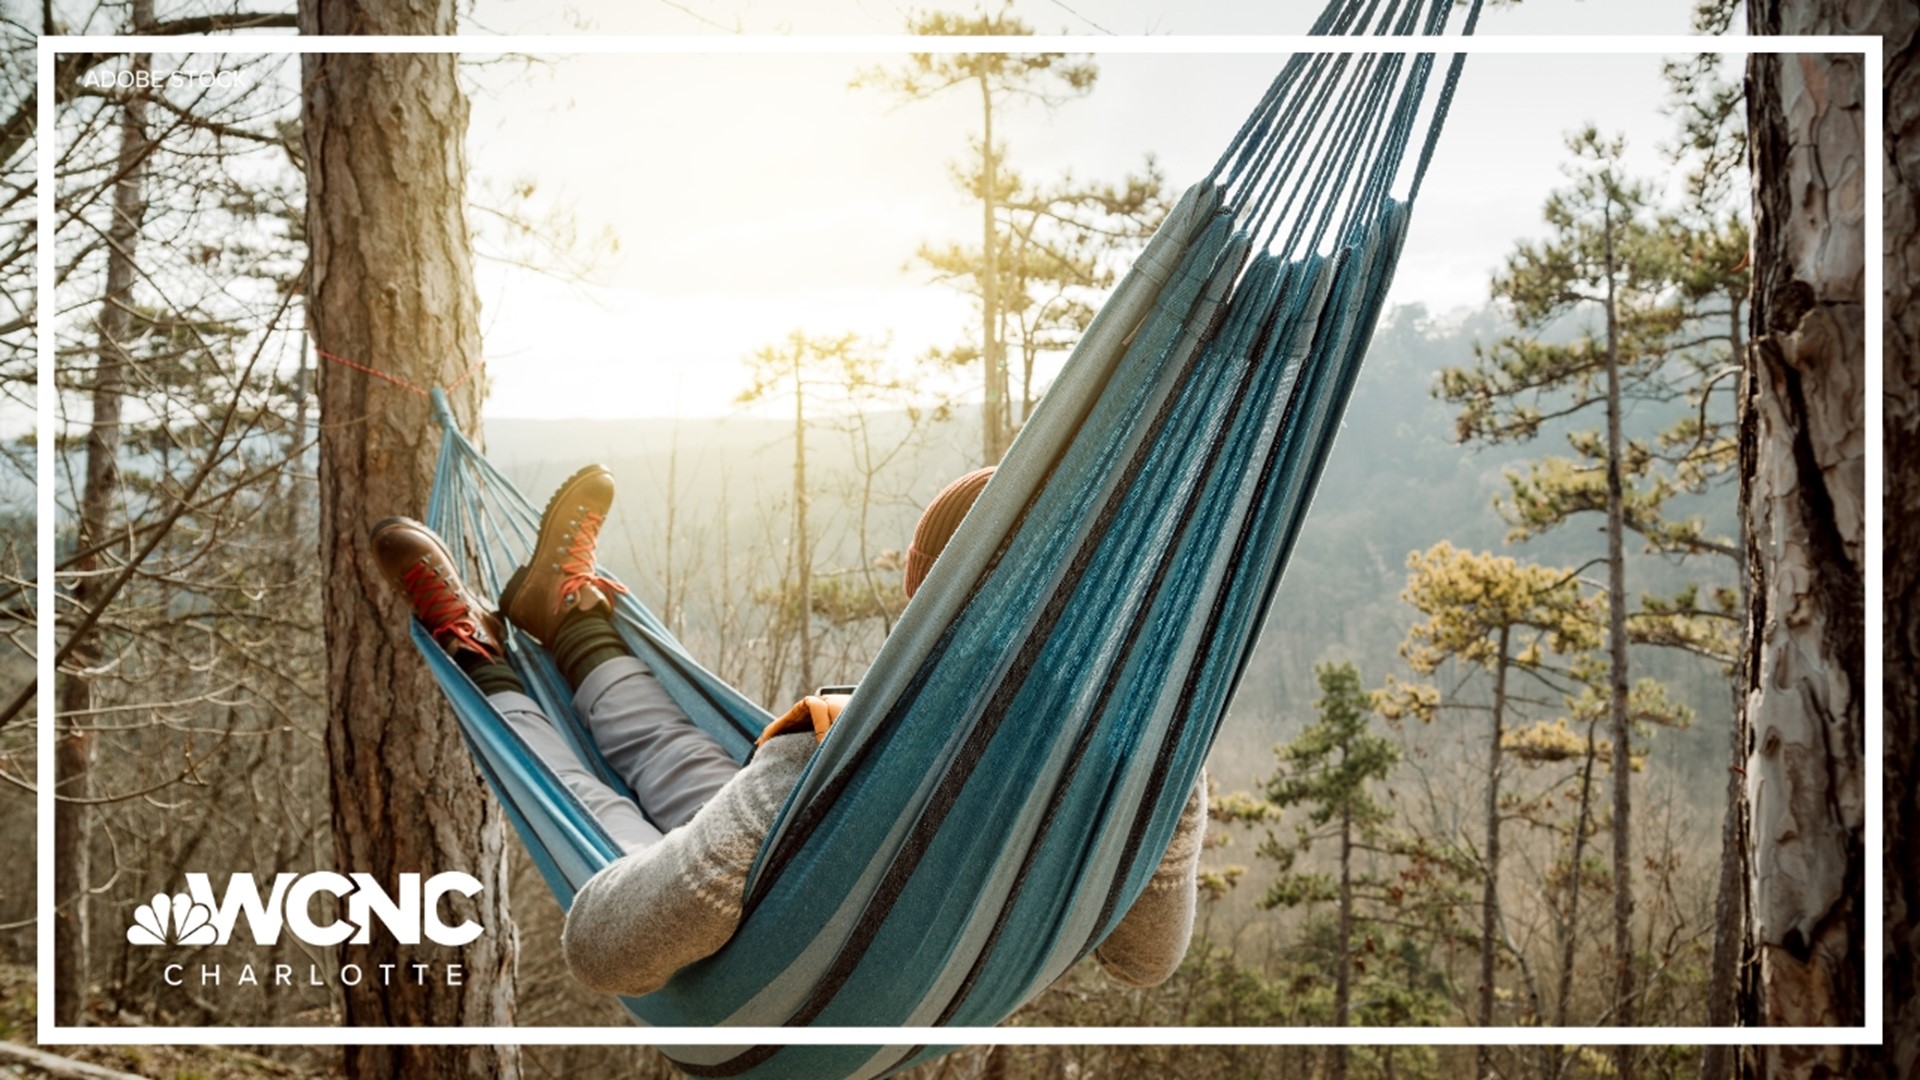 For many, spring break is just around the corner and we all have our own ways of kicking back.